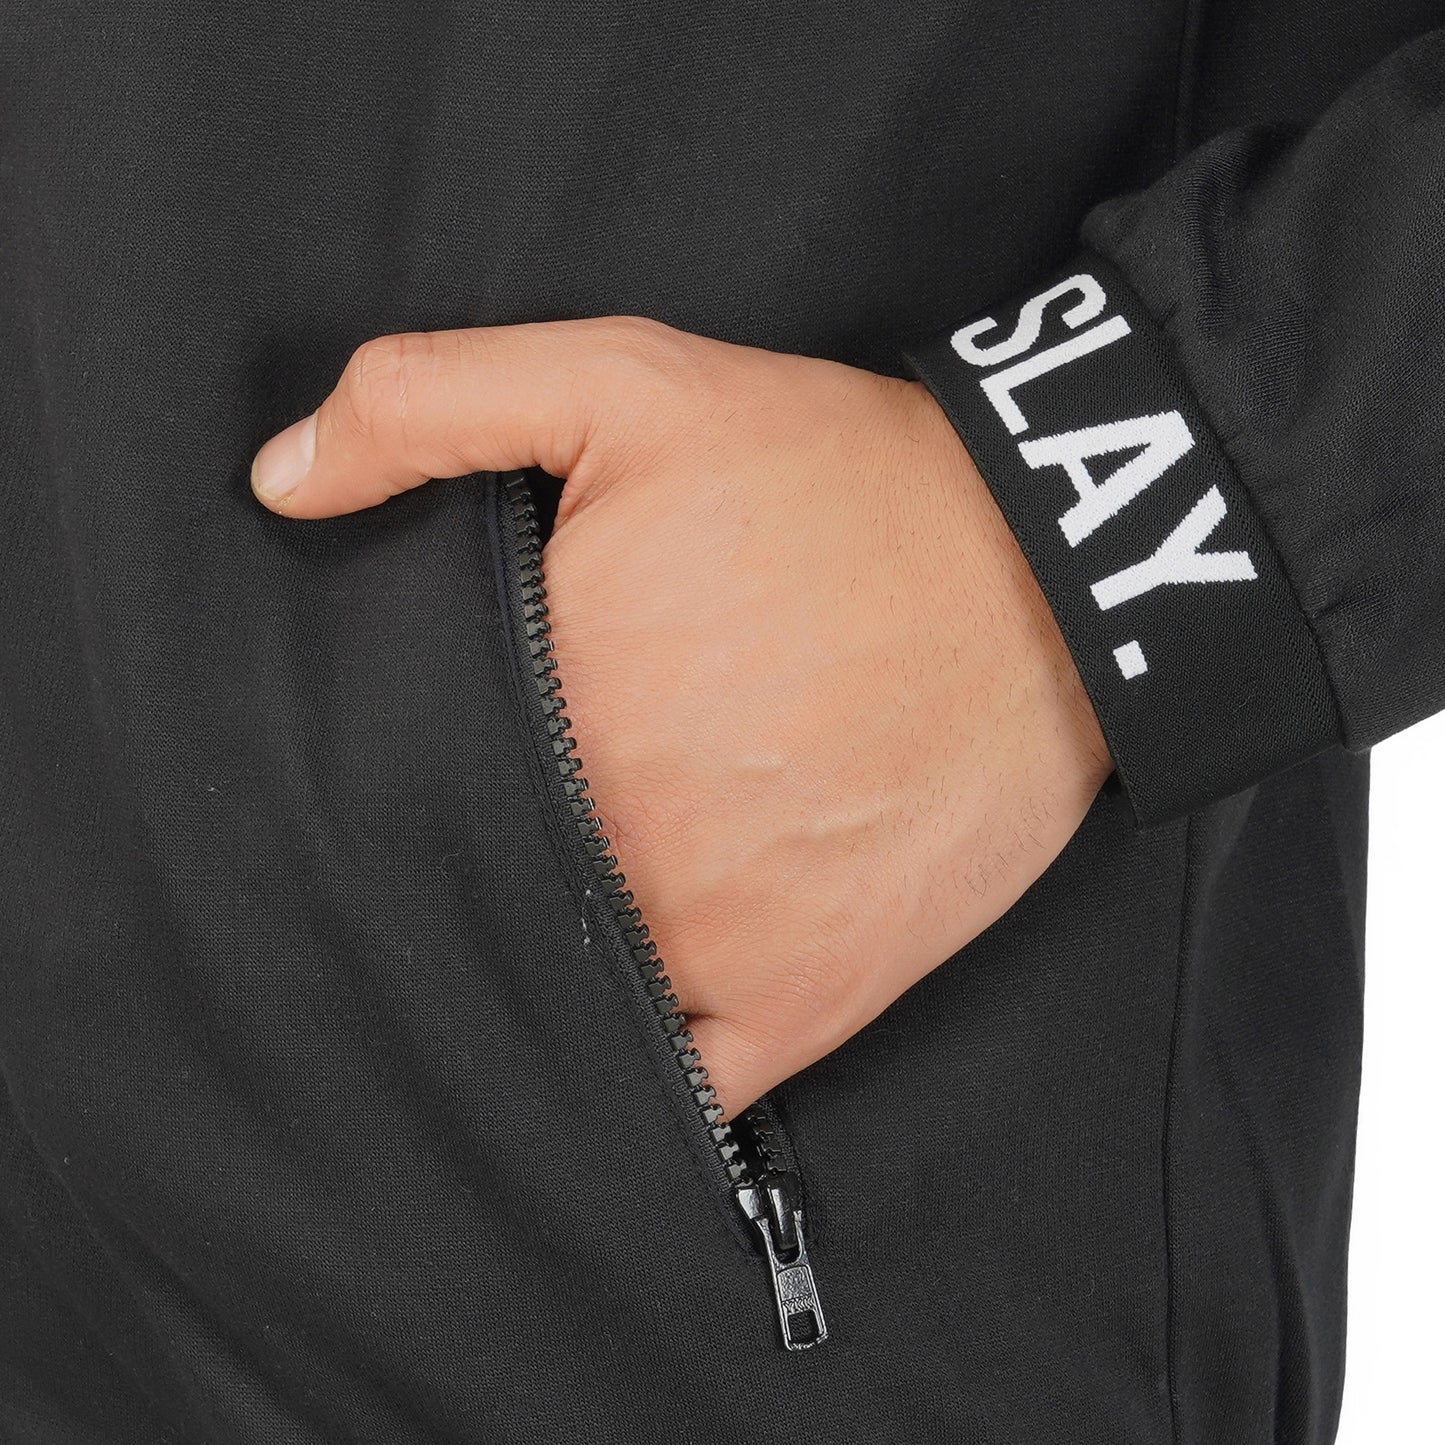 SLAY. Classic Men's Limited Edition Black Tracksuit